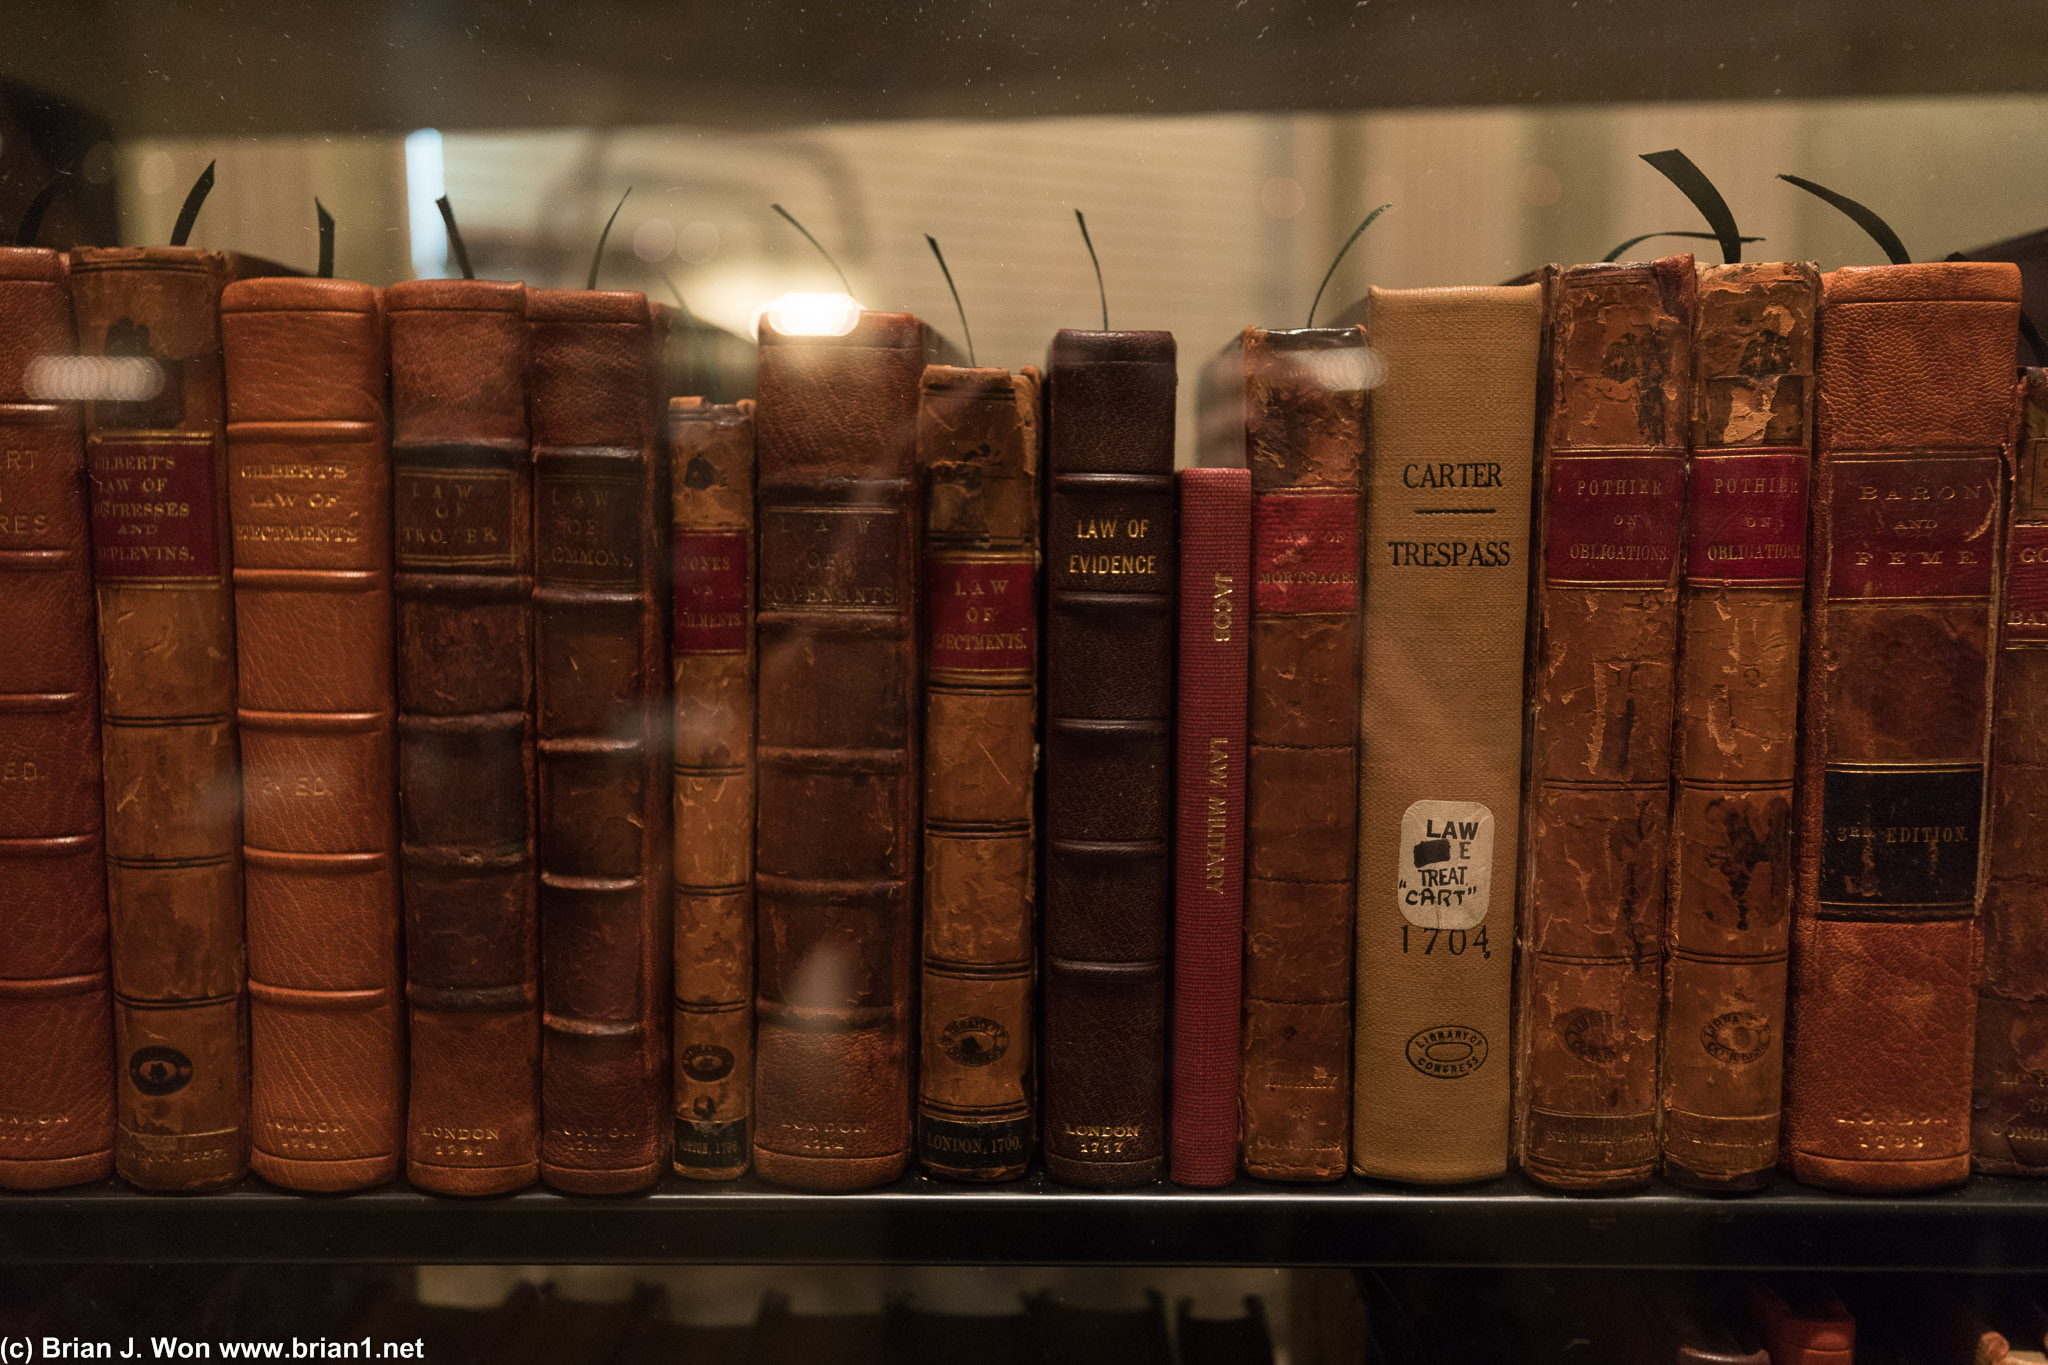 Some of the books of Thomas Jefferson's Library.